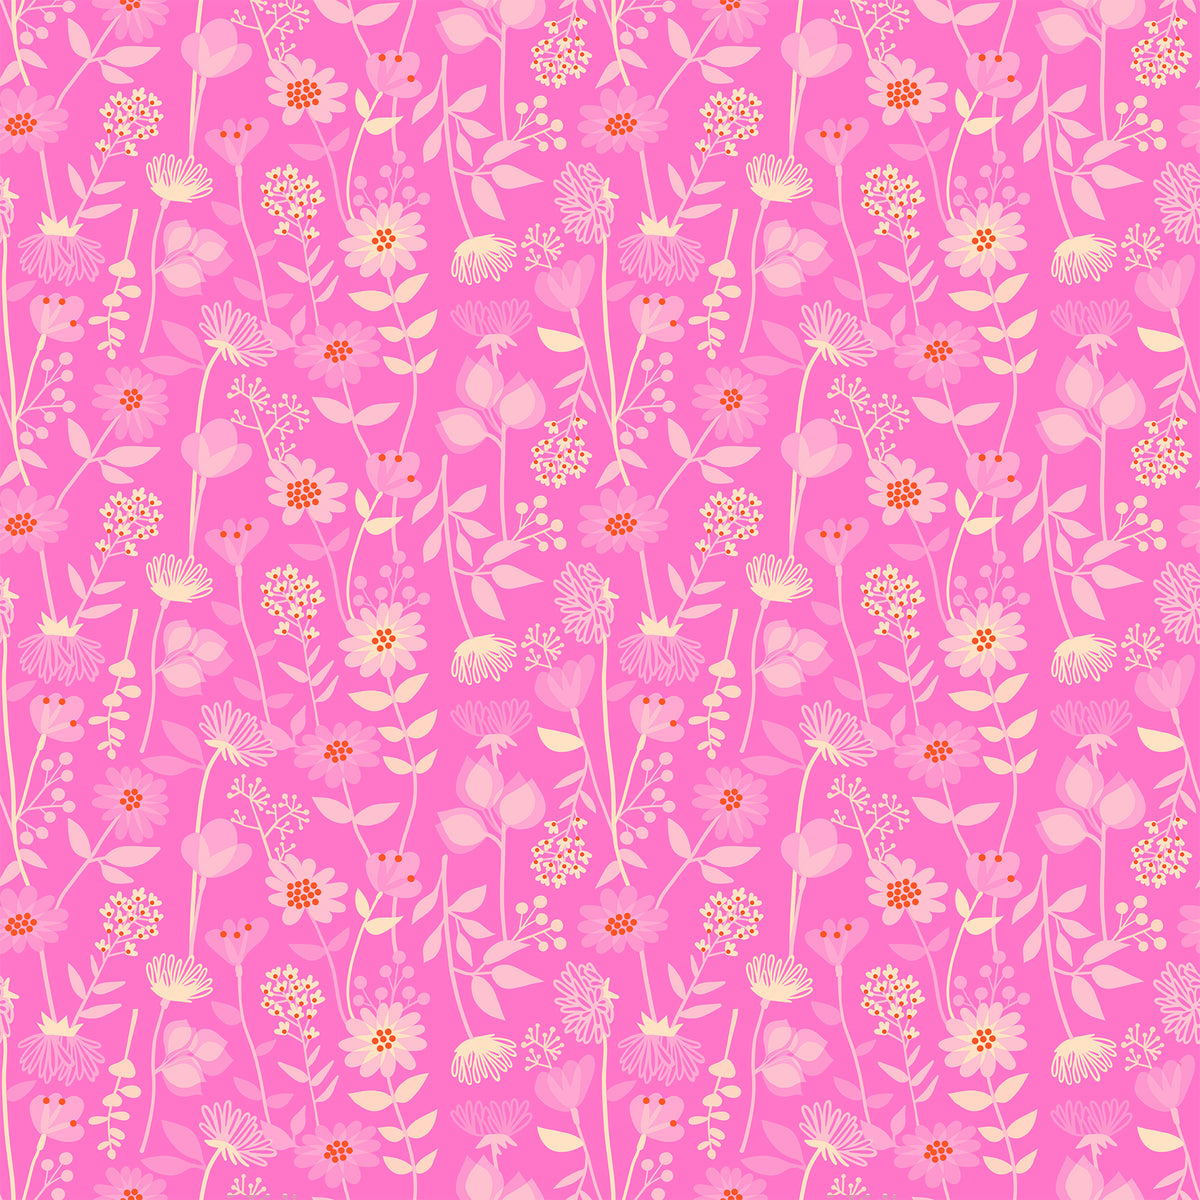 Stay Gold Quilt Fabric by Ruby Star Society - Meadow Daisy in Lipstick Pink - RS0021 13